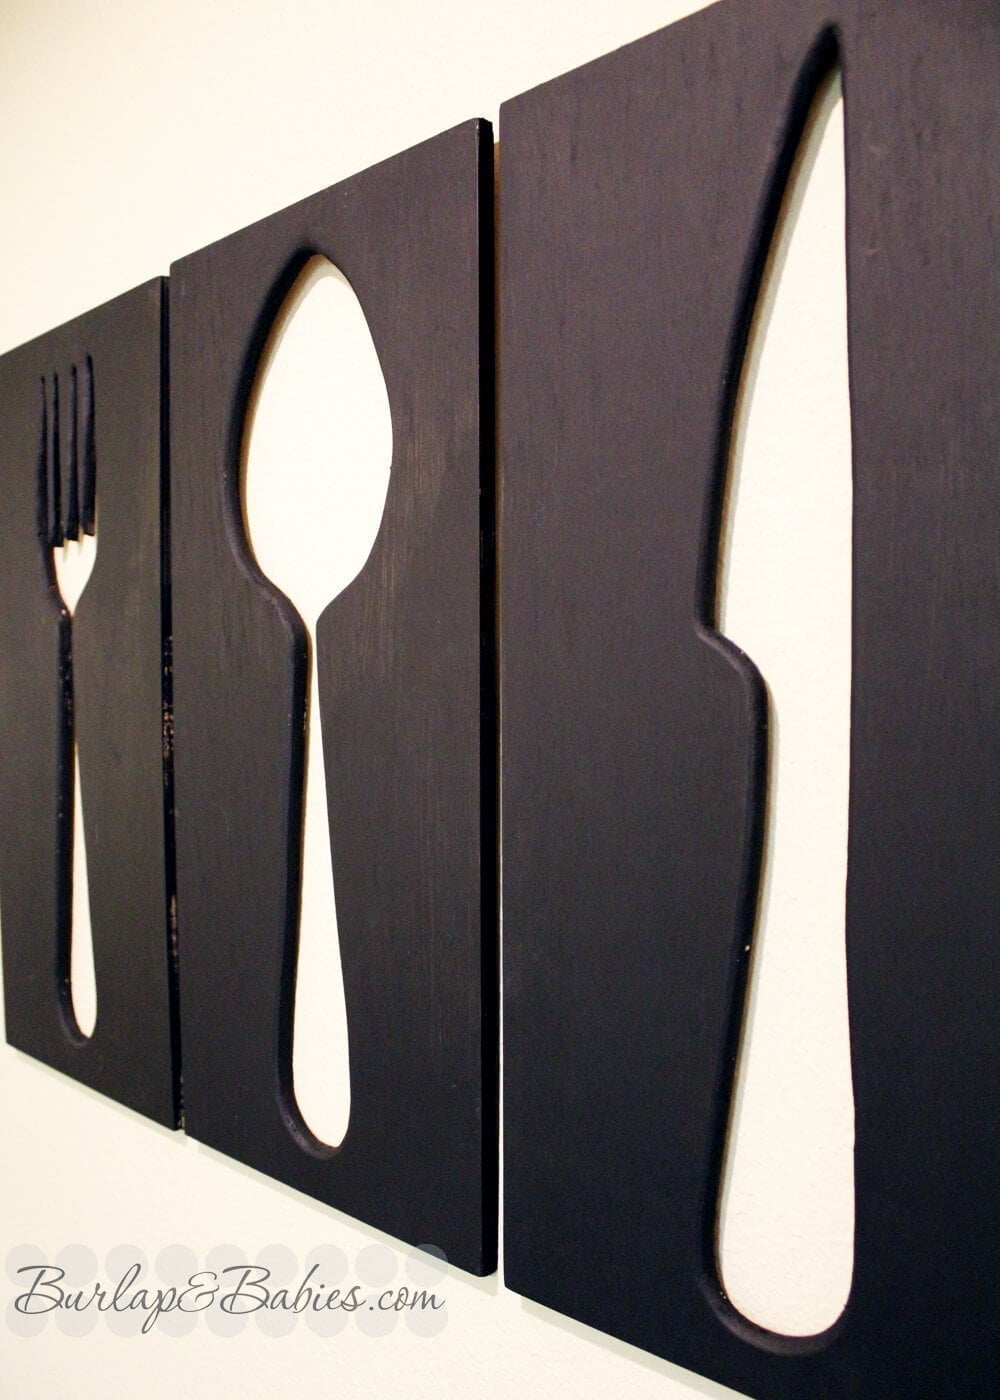 Fork Spoon And Knife Negative Space Art Homebnc